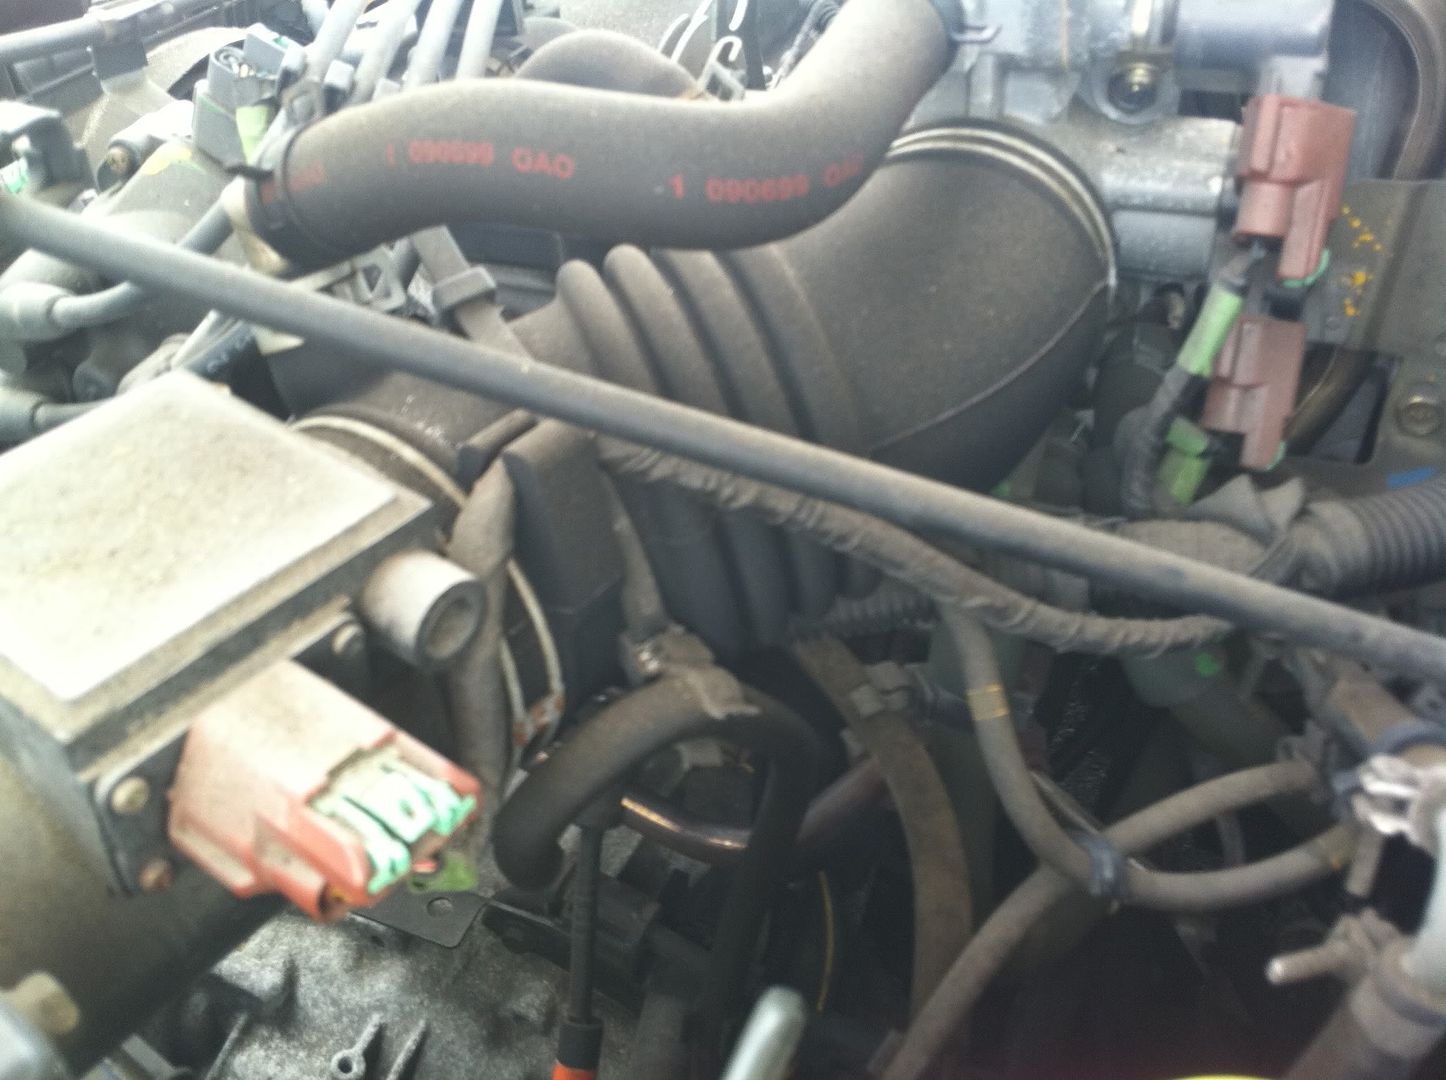 How to change a starter on a 1996 nissan sentra #8